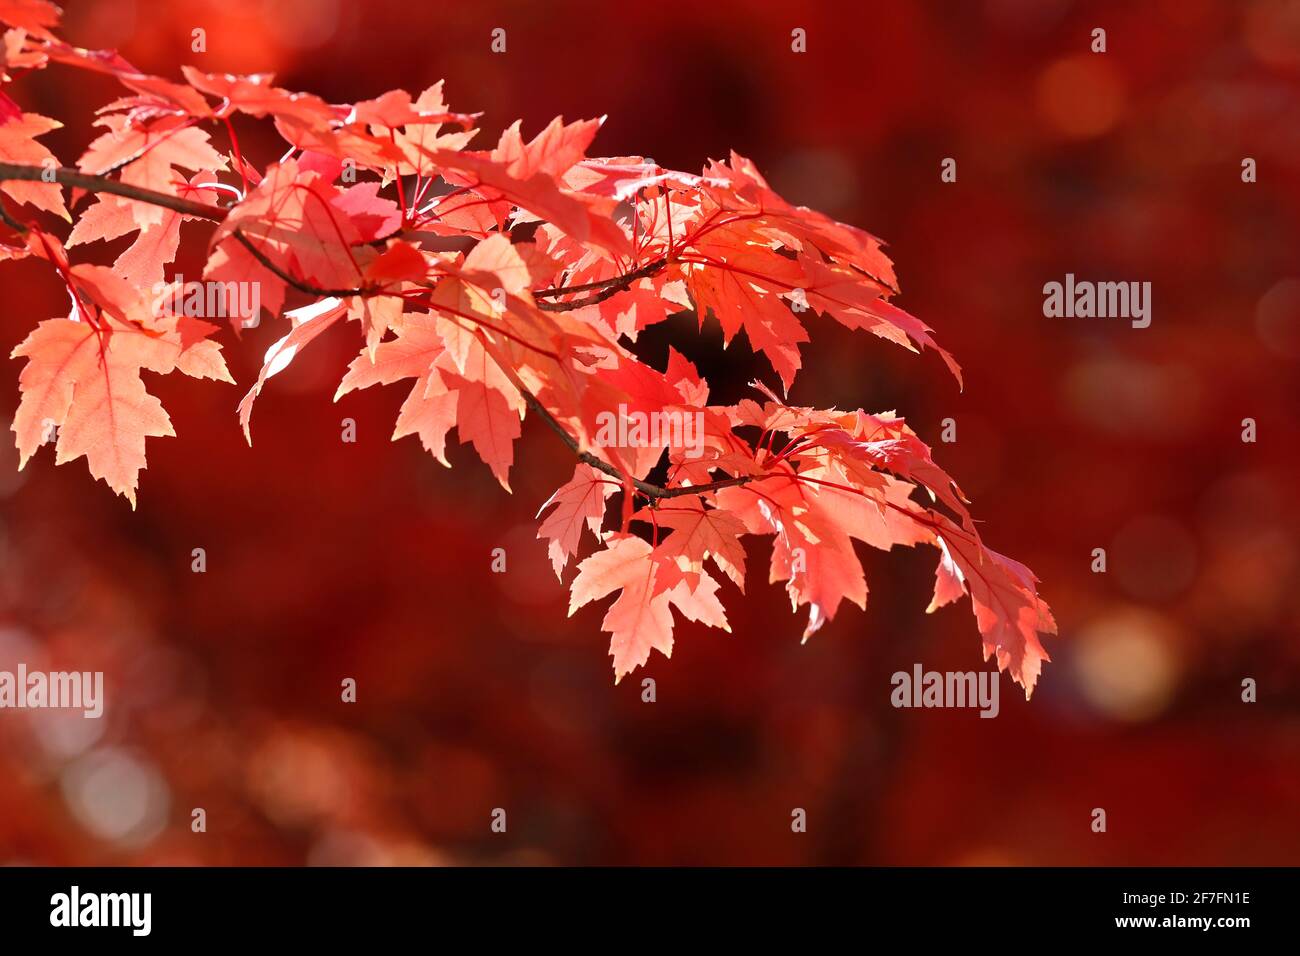 Maple tree with red-coloured autumn leaves, France, Europe Stock Photo